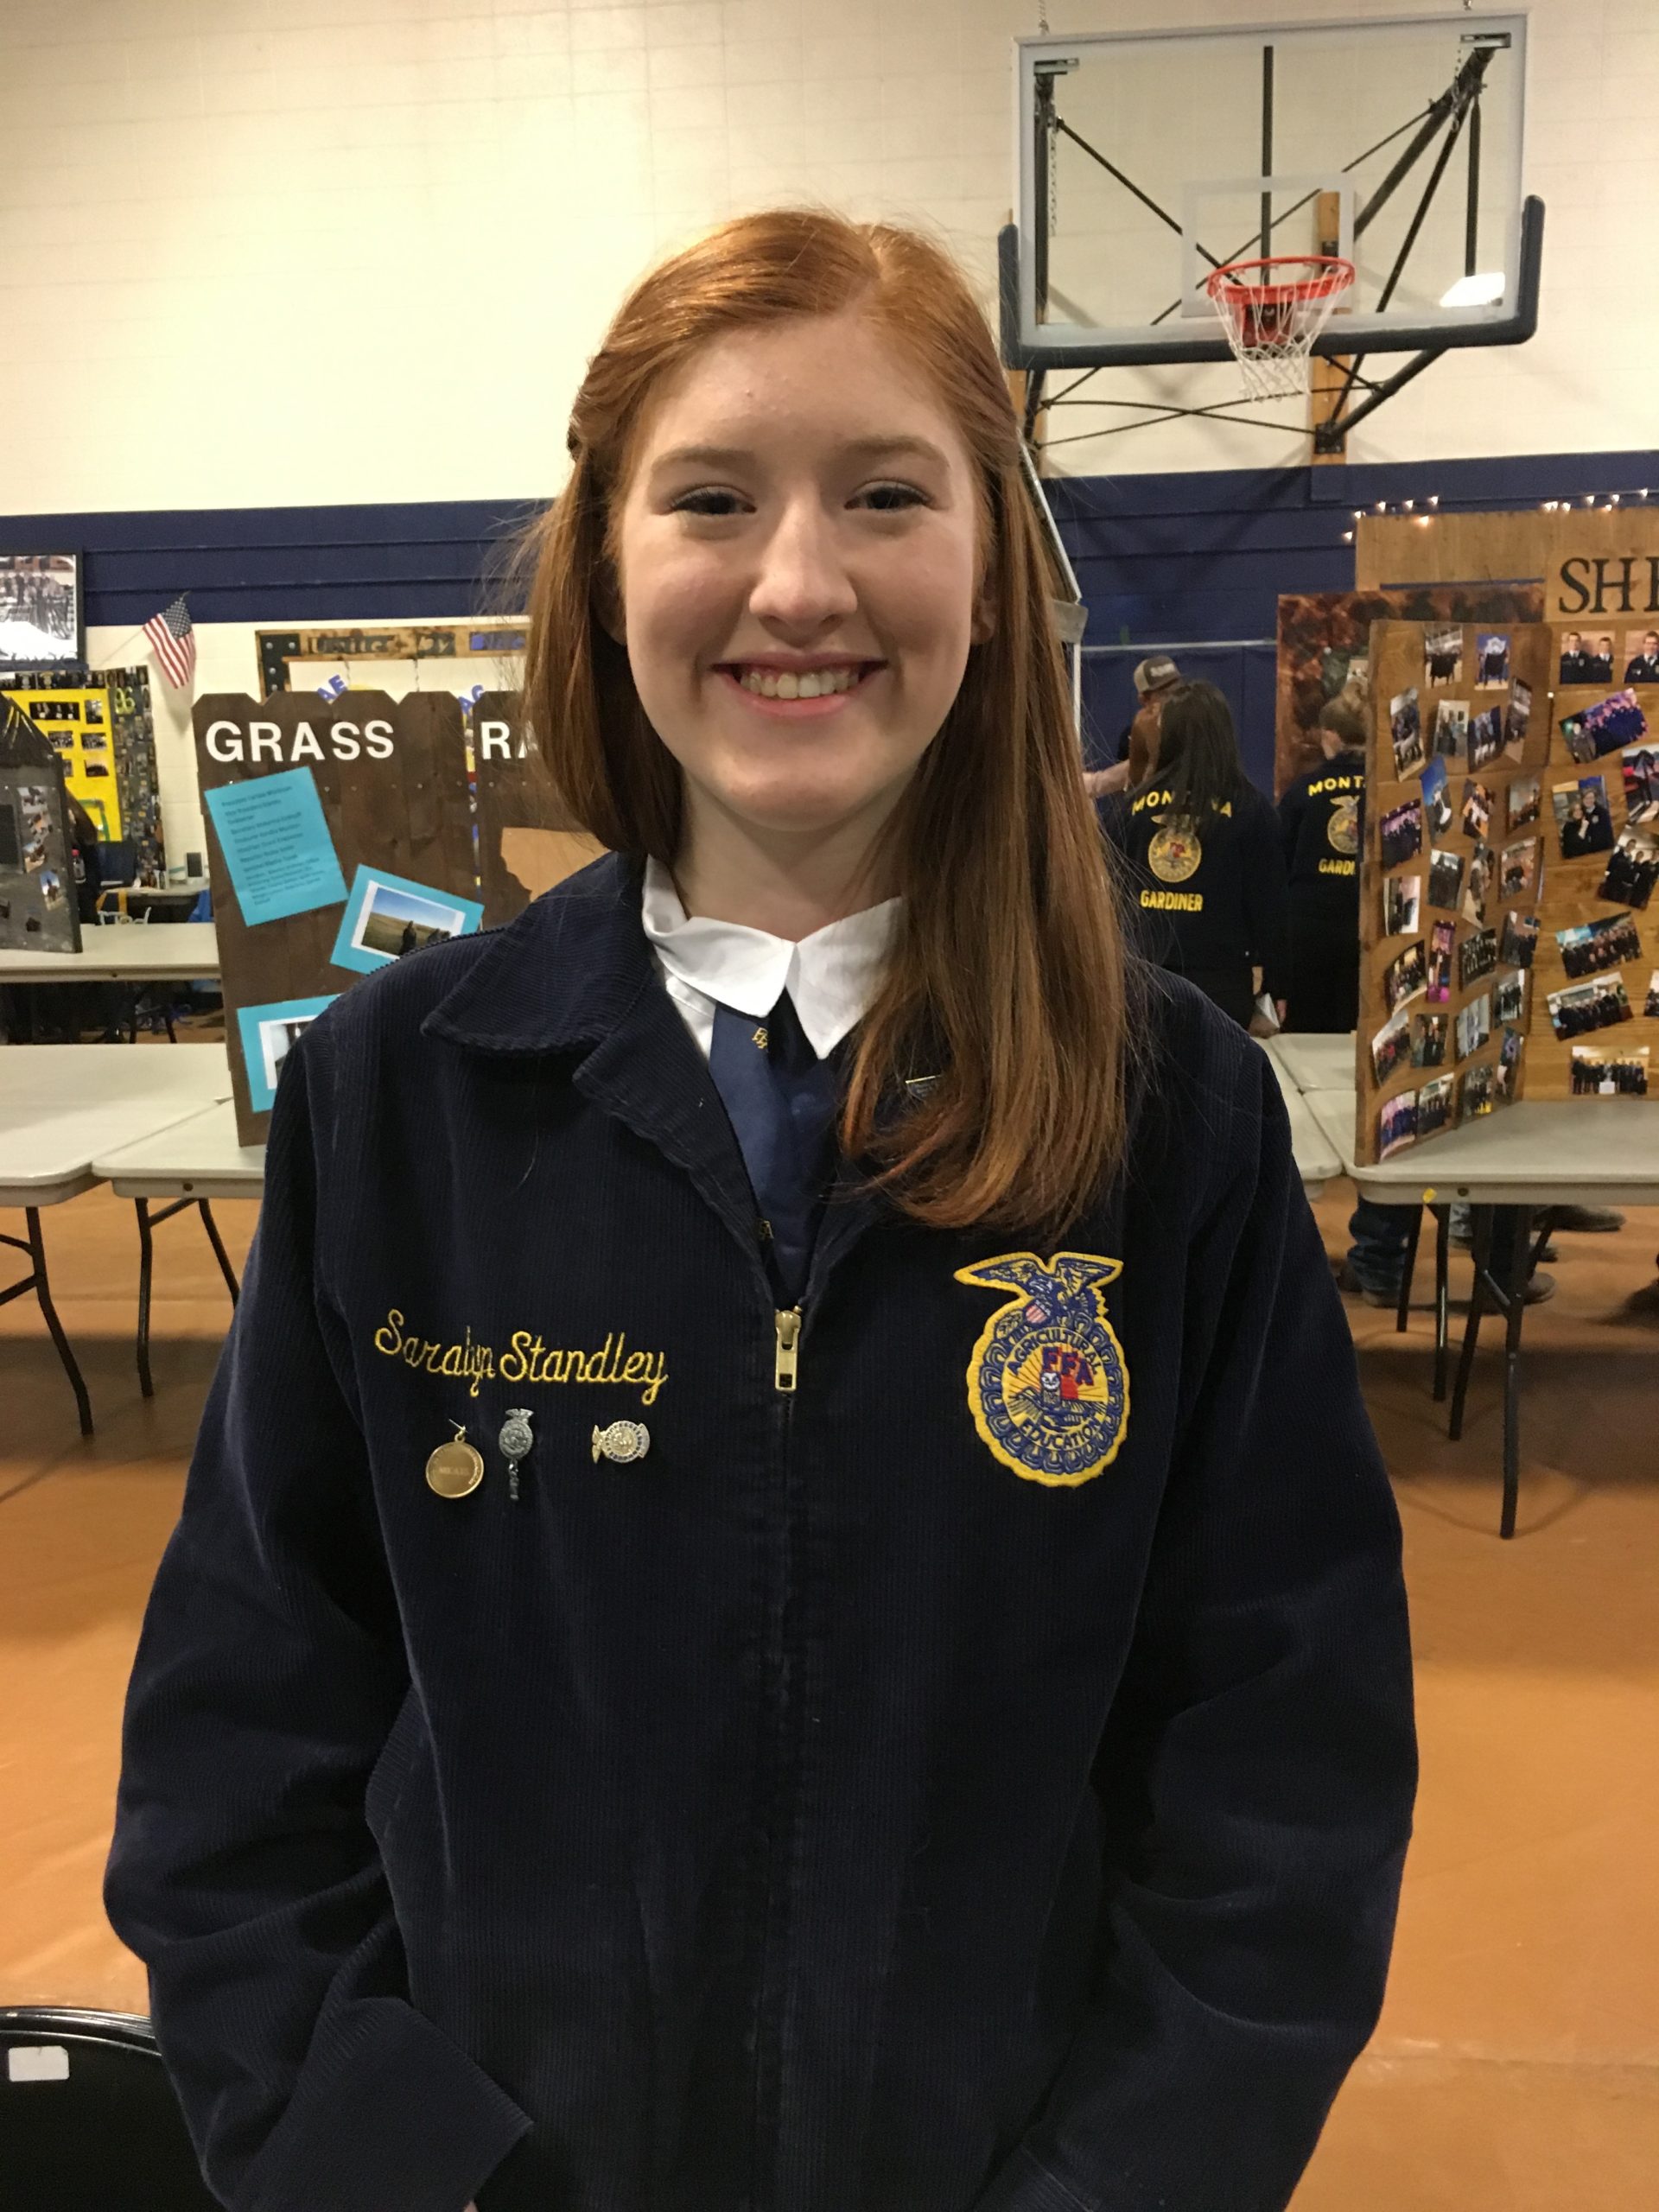 OFI 126: Montana FFA Convention | 3 Great Days Of Speaking And Interviewing Students